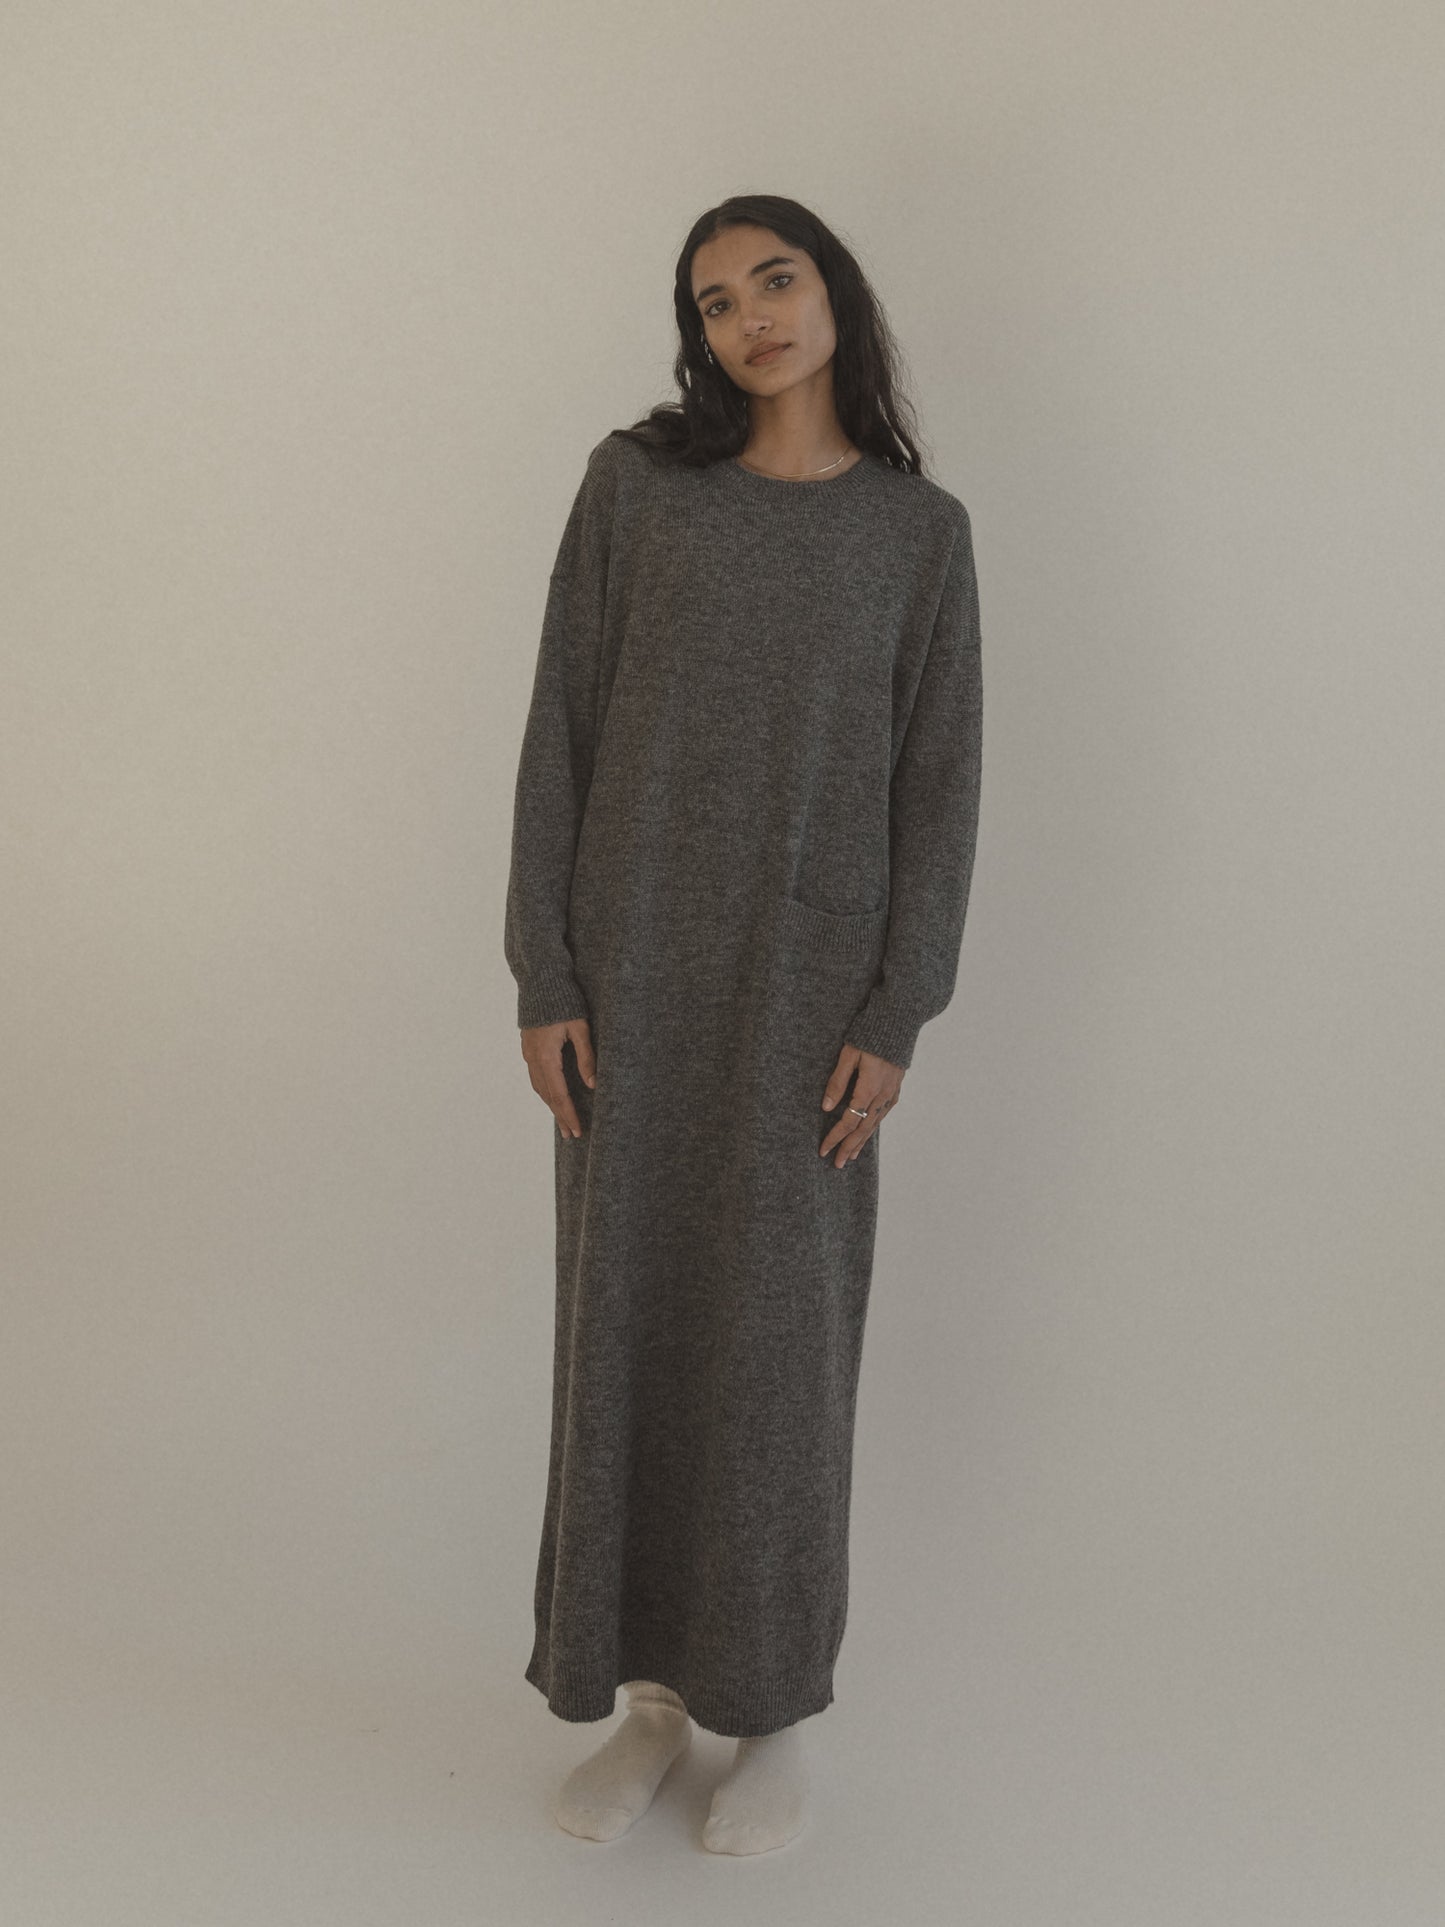 Maison Dress in Charcoal